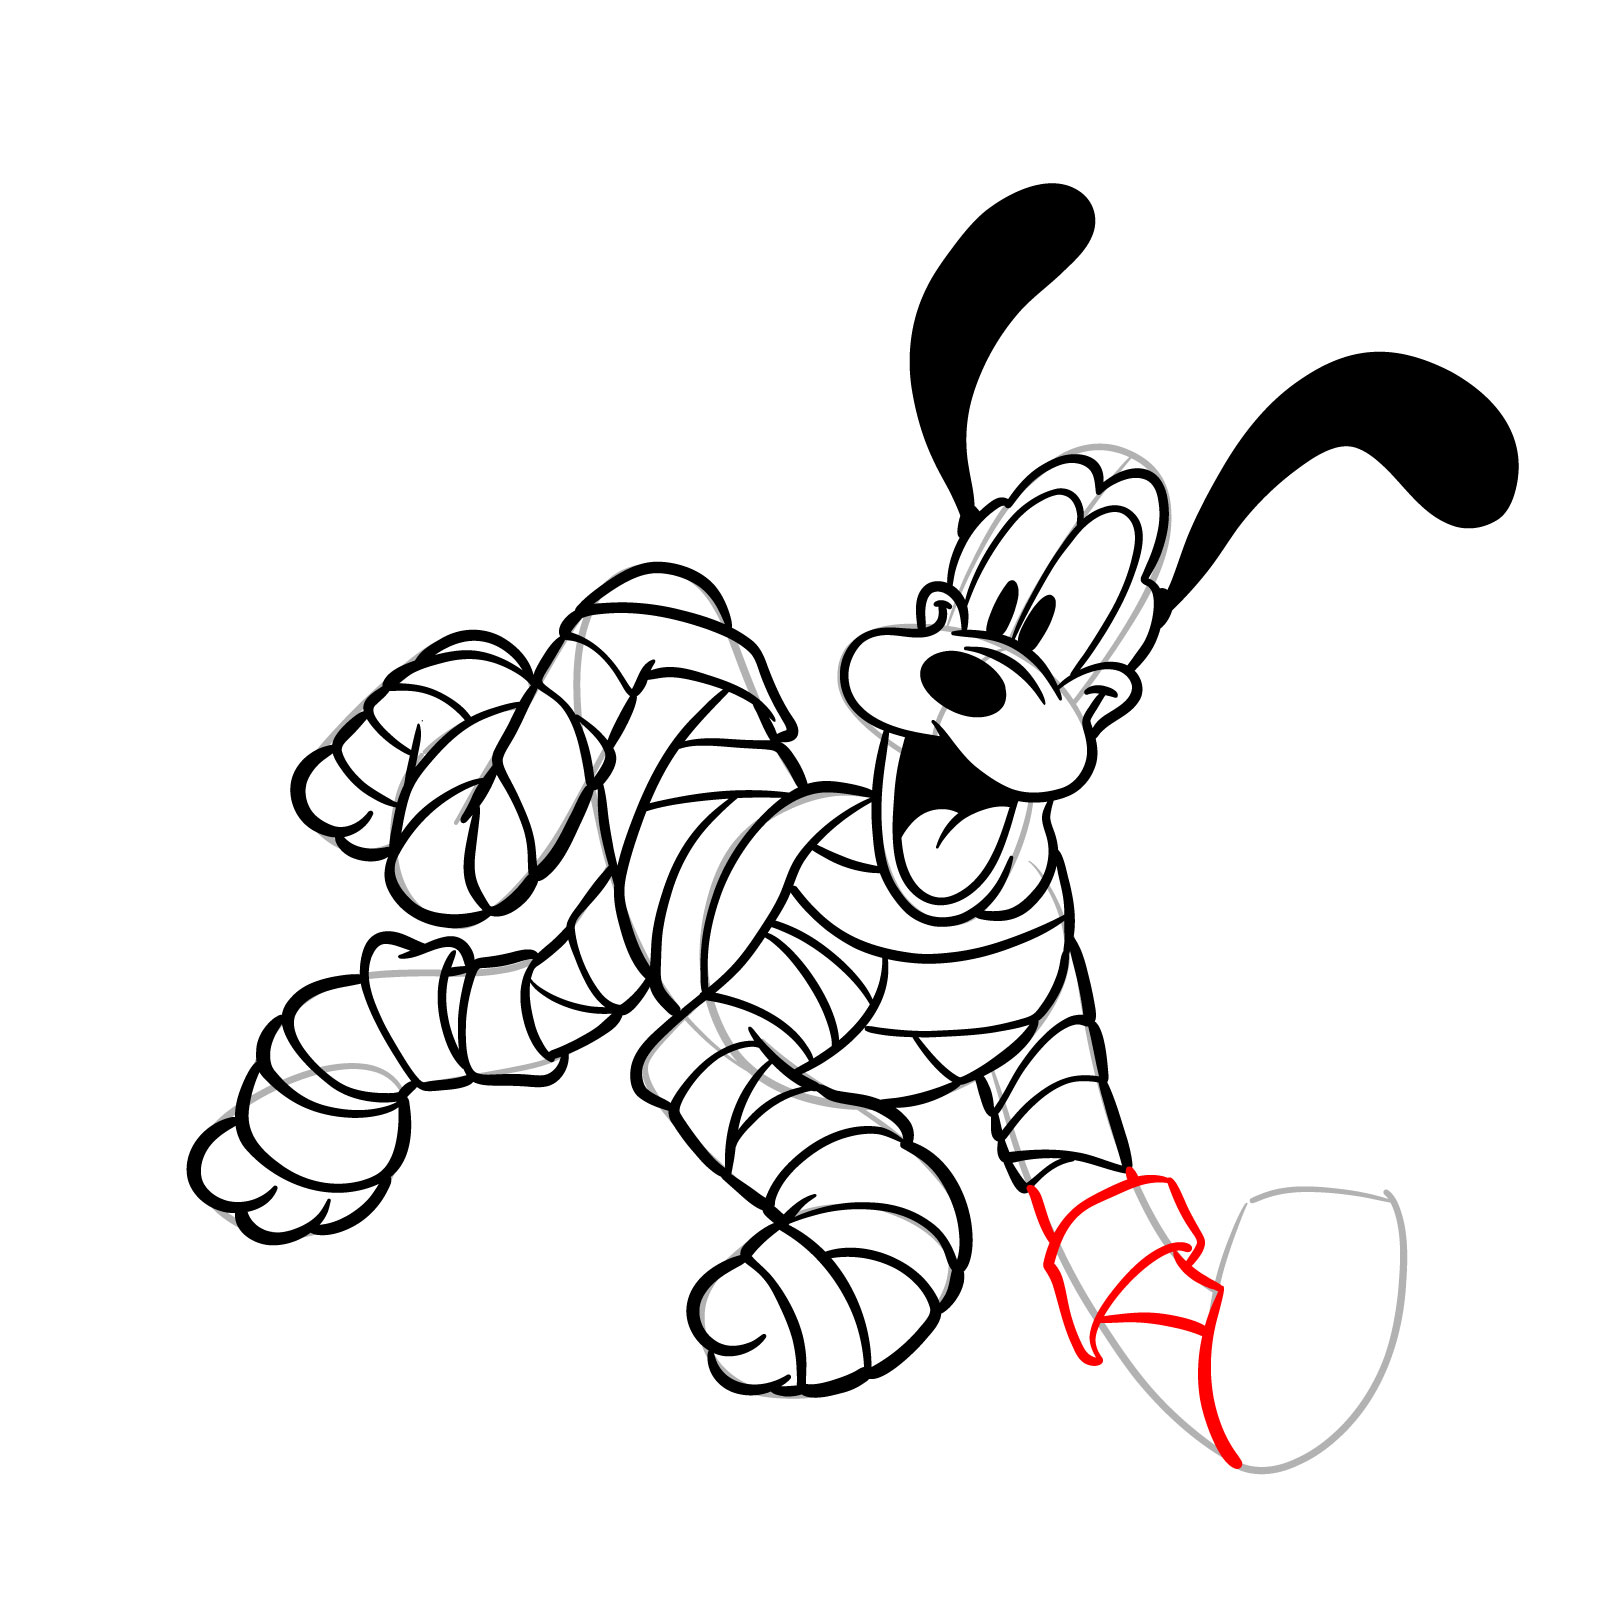 How to draw Halloween Pluto as a mummy - step 25